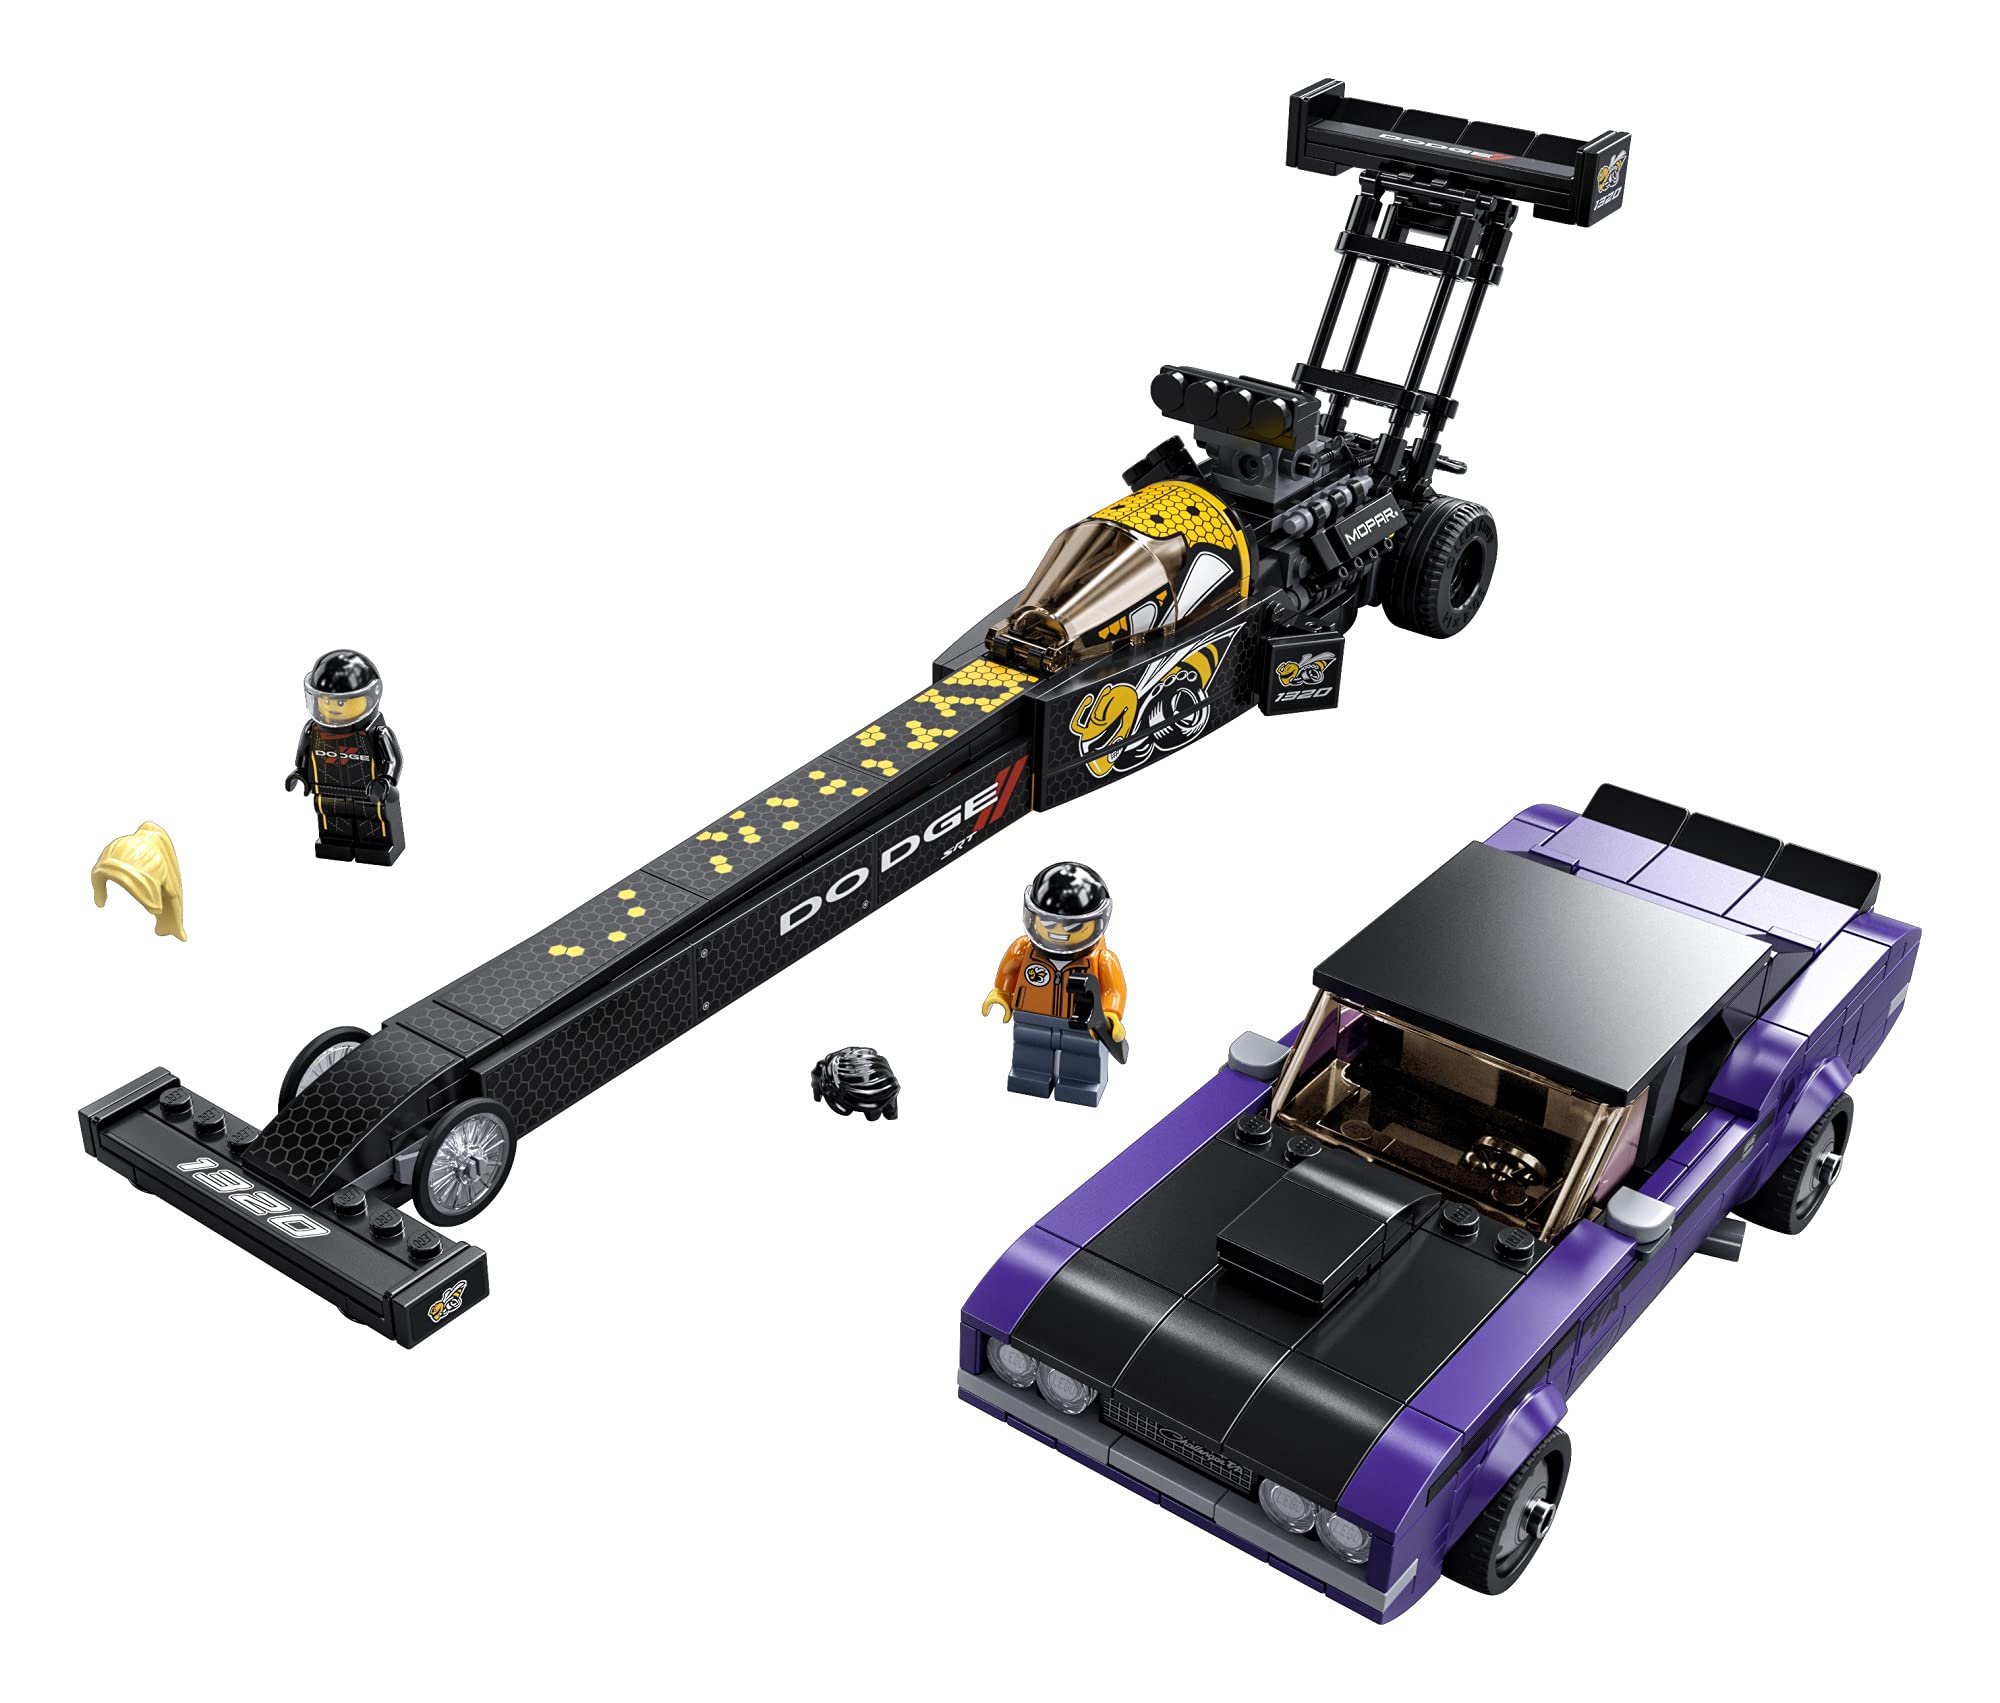 LEGO Speed Champions Mopar Dodge//SRT Top Fuel Dragster and 1970 Dodge Challenger T/A 76904 Building Toy; New 2021 (627 Pieces)